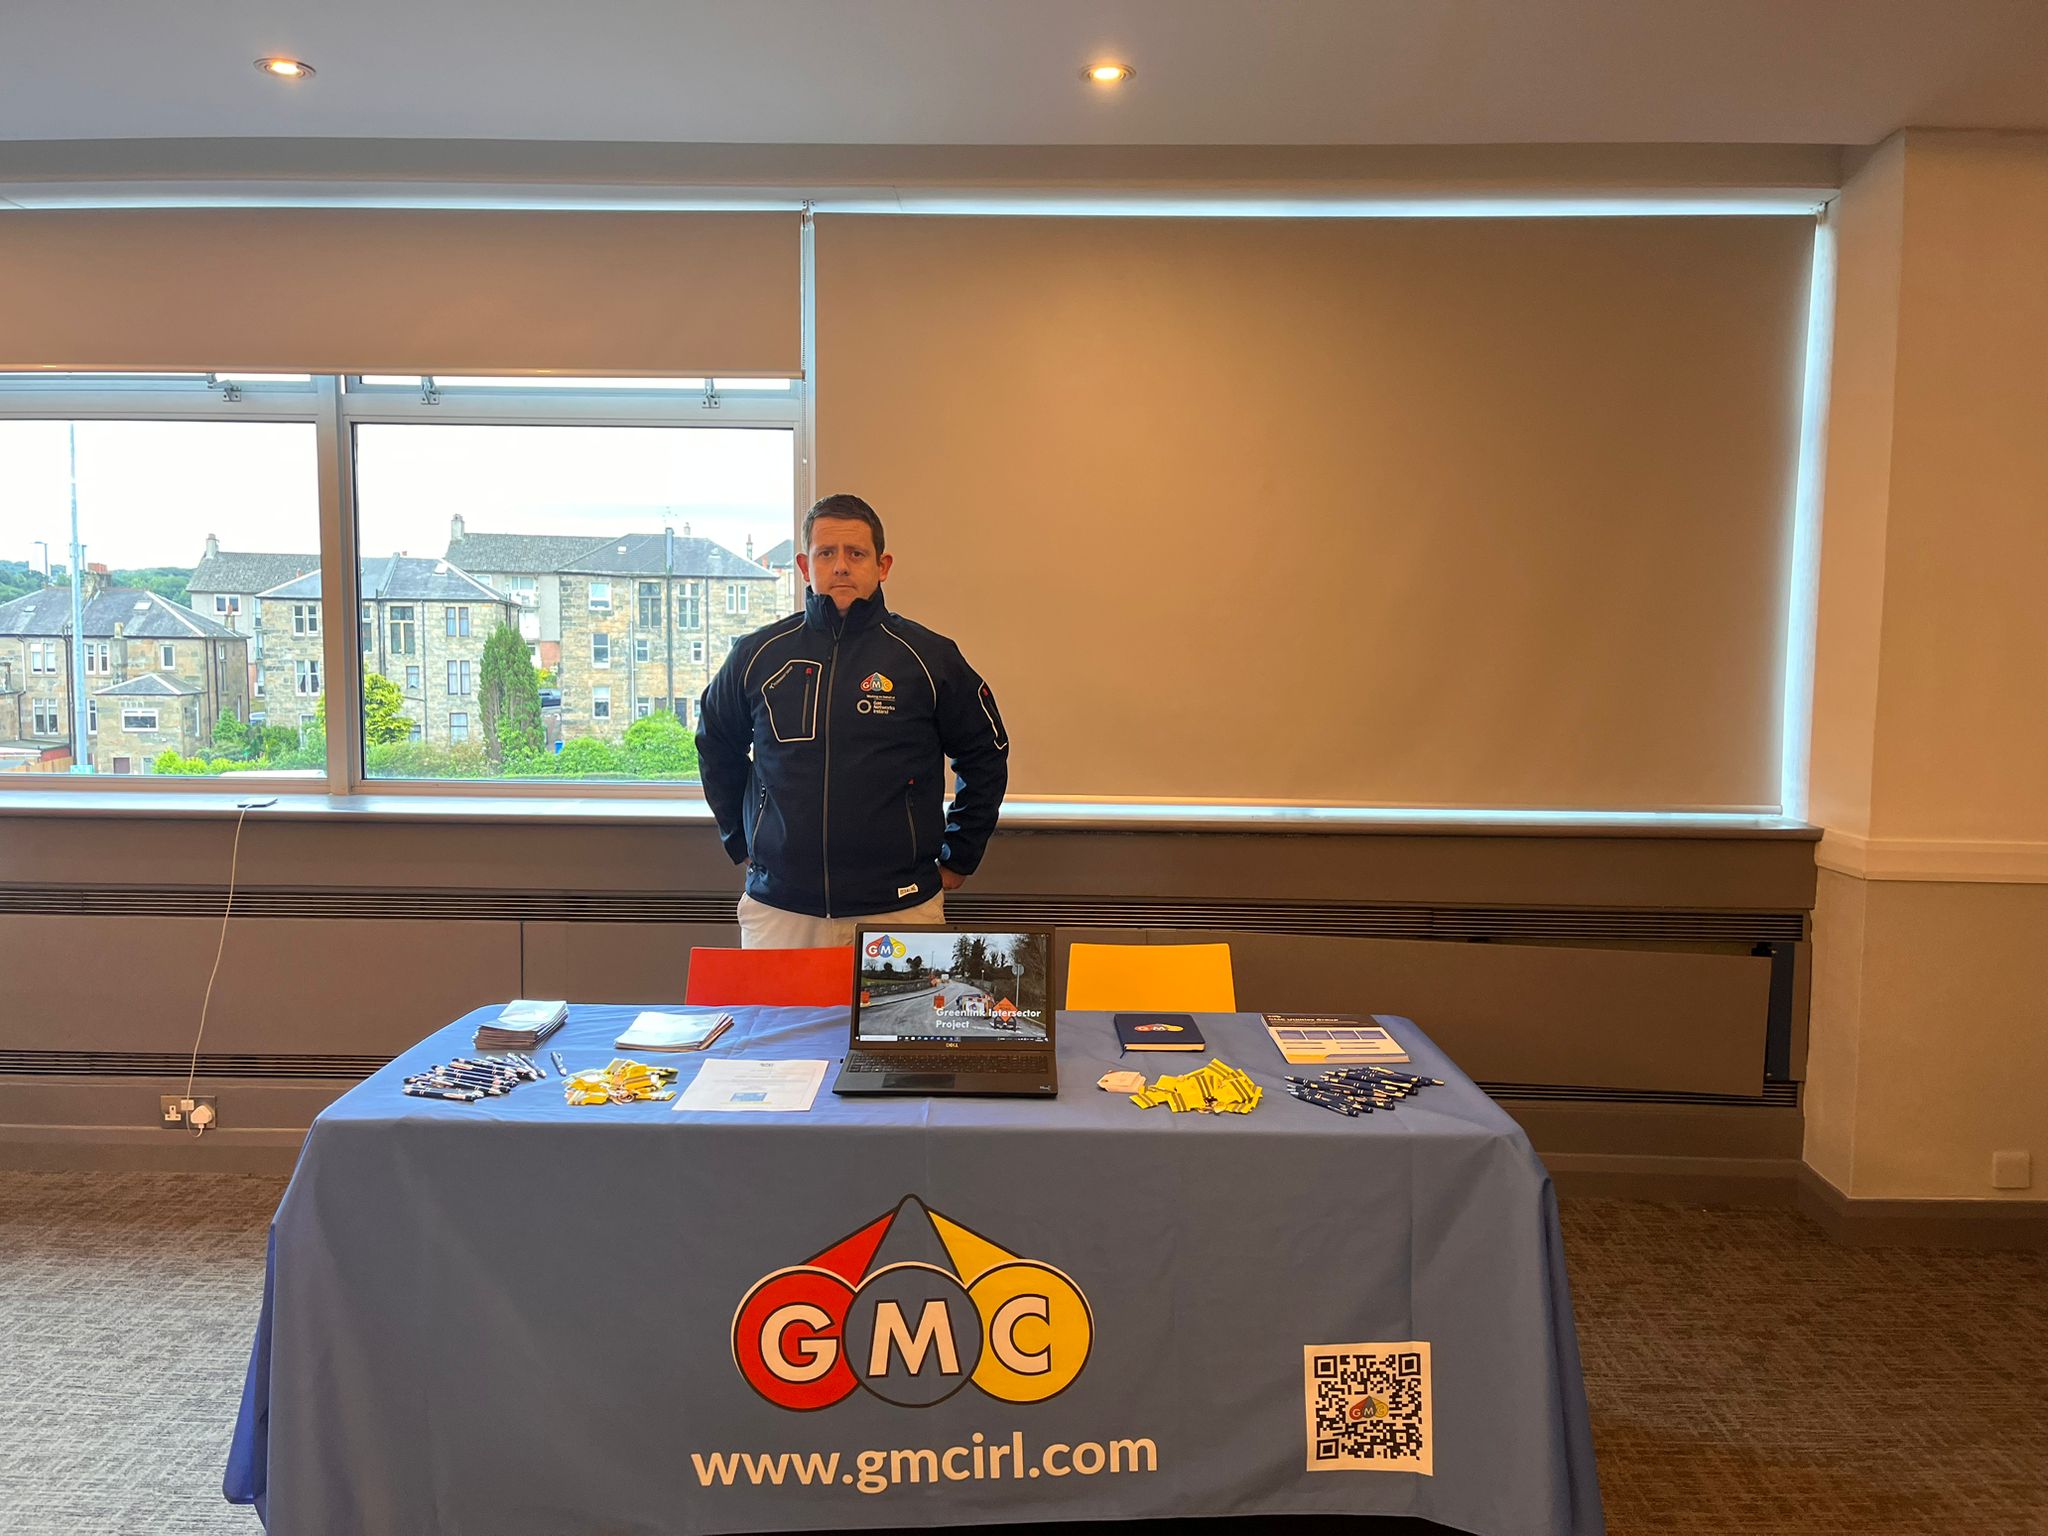 GMC Utilities at our event in Glasgow